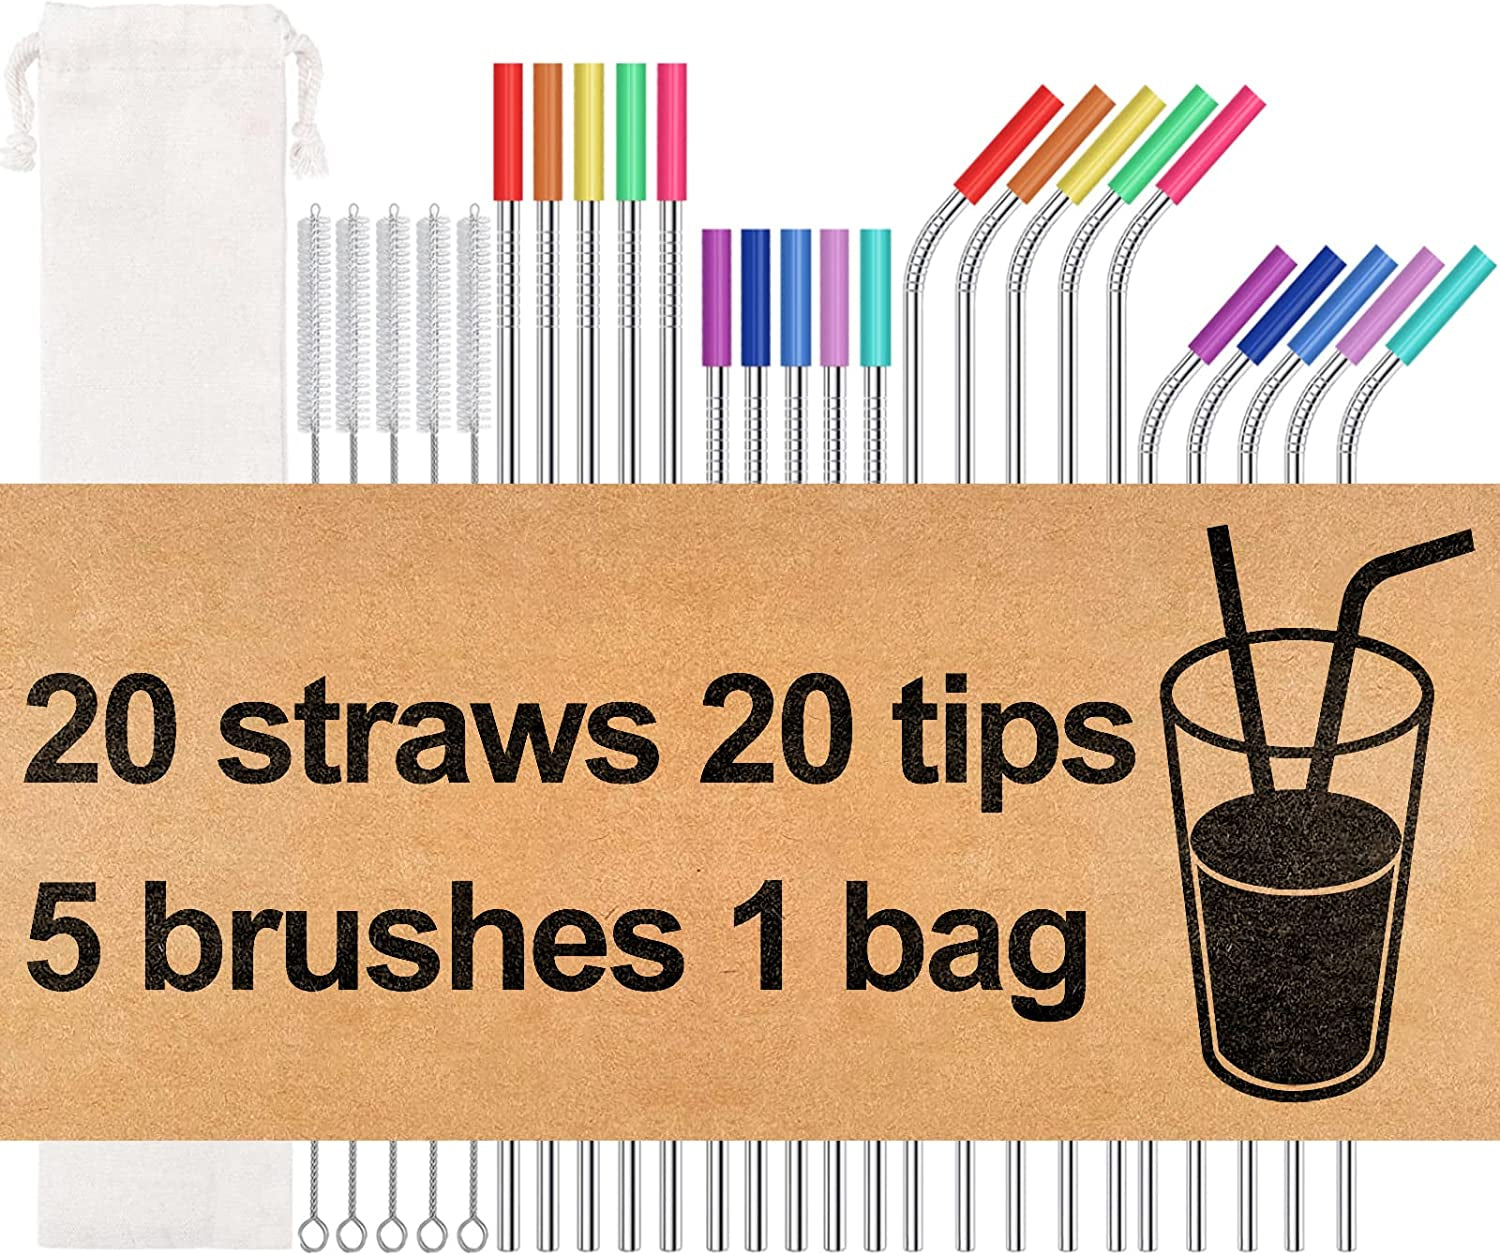 20 Pack Reusable Stainless Steel Metal Straws,10.5" & 8.5" Reusable Drinking Straws with 20 Silicone Tips 5 Straw Brushes 1 Travel Case,Eco Friendly Extra Long Metal Straw Fit for 20 24 30 Oz Tumbler